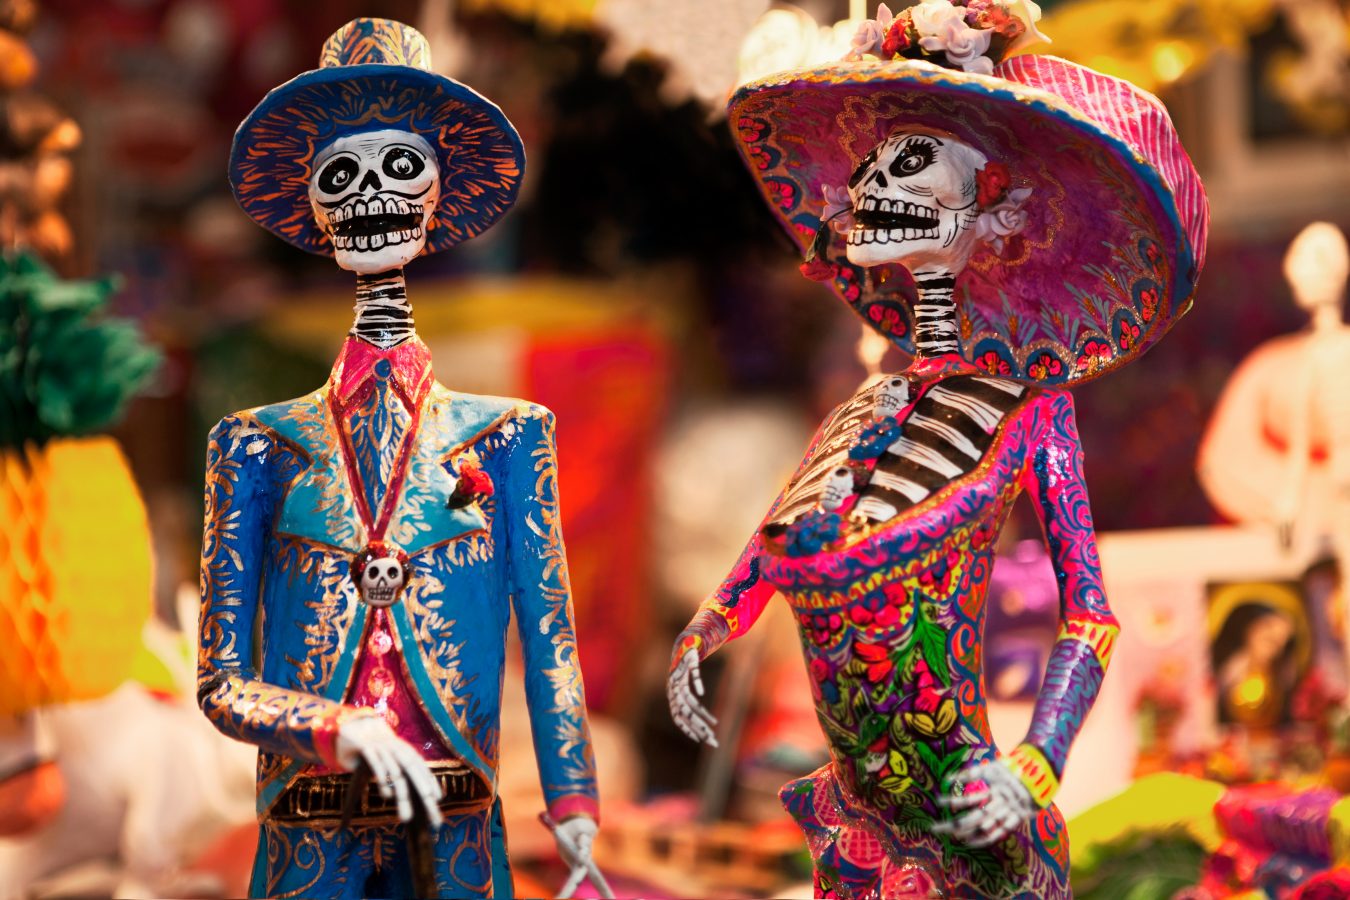 Day-of-the-Dead-Figurines-in-Mercado2-003.jpg